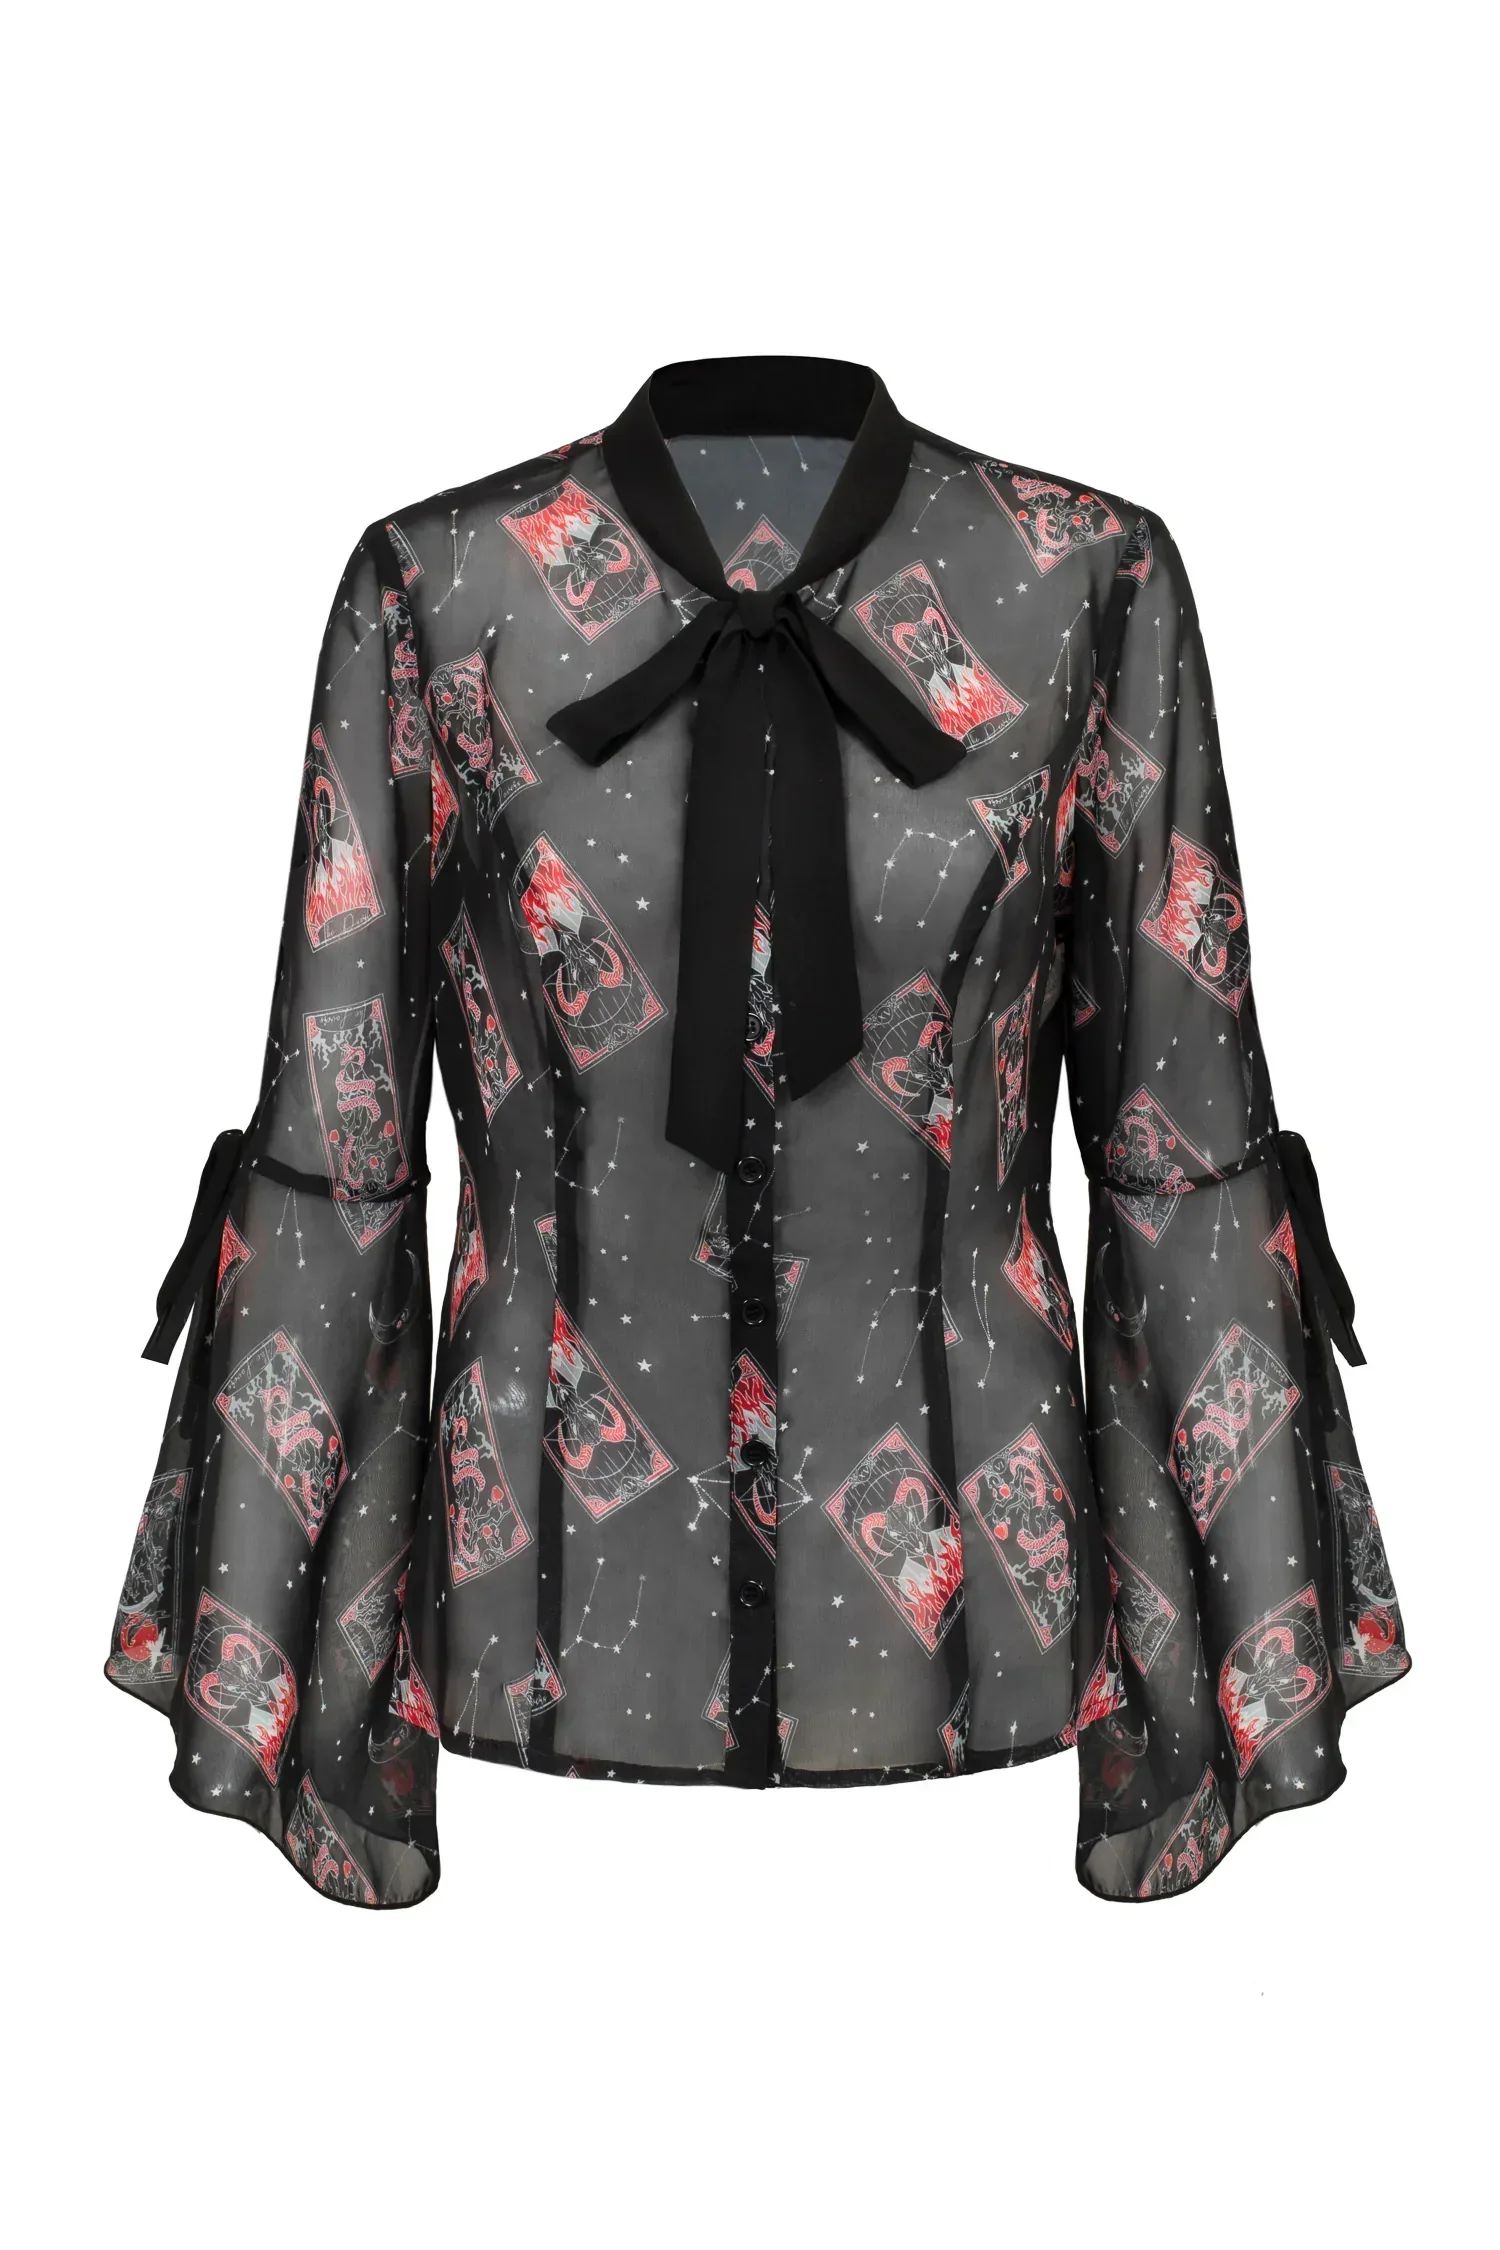 PS60252bbbbbbbbb-chemisier-blouse-robe-gothique-rock-hell-bunny-duality